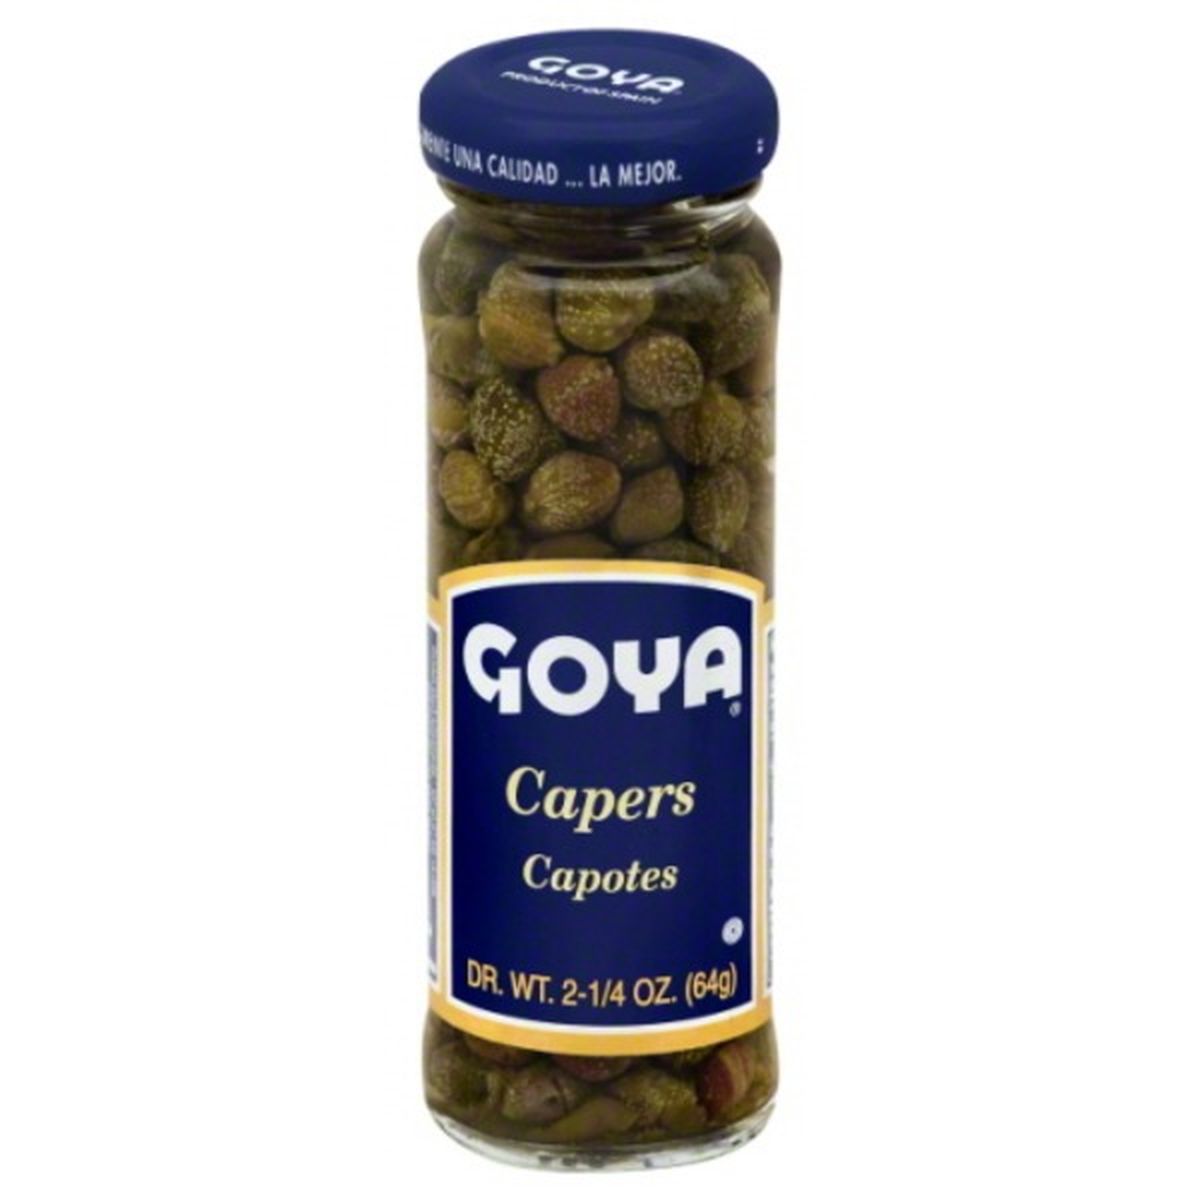 Calories in Goya Capers